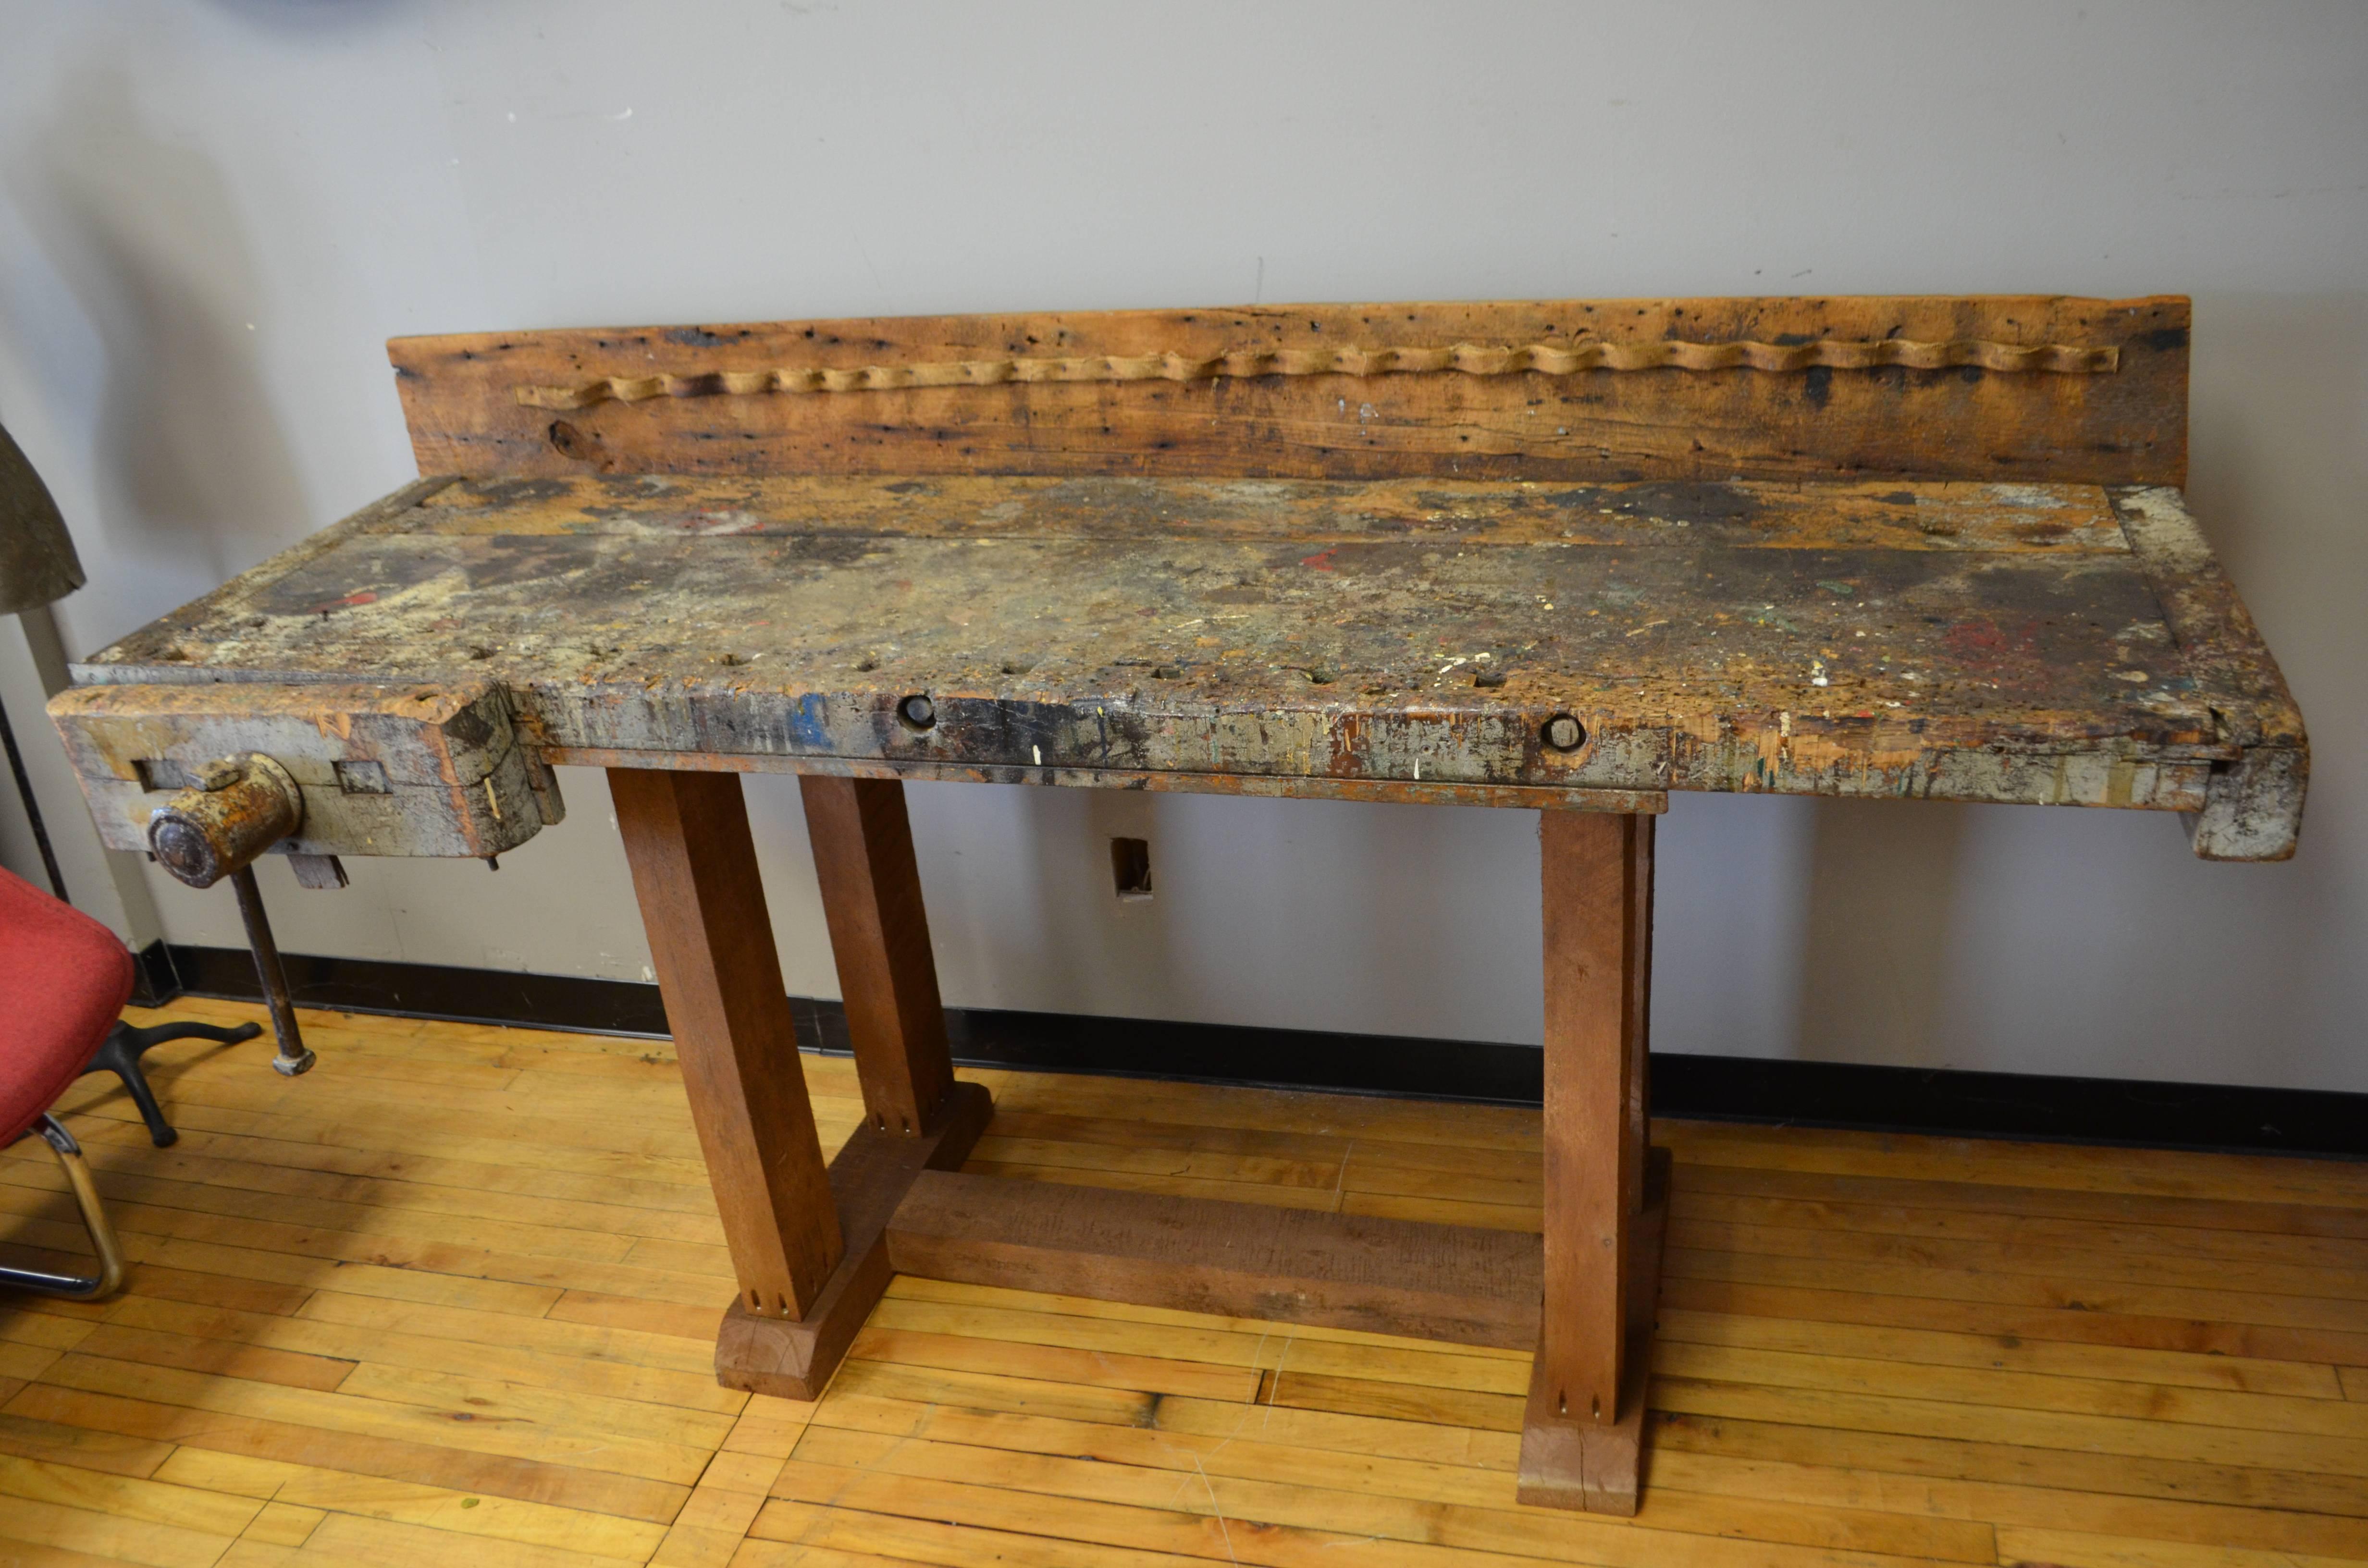 Primitive woodworker's butcher block table with wonderful patina of paint stains, work divots and gouges, late 1800s. Canvas tool holder on back board. Sits solidly upon a base fashioned from reclaimed cedar. Cleaned and sealed. Depth noted is